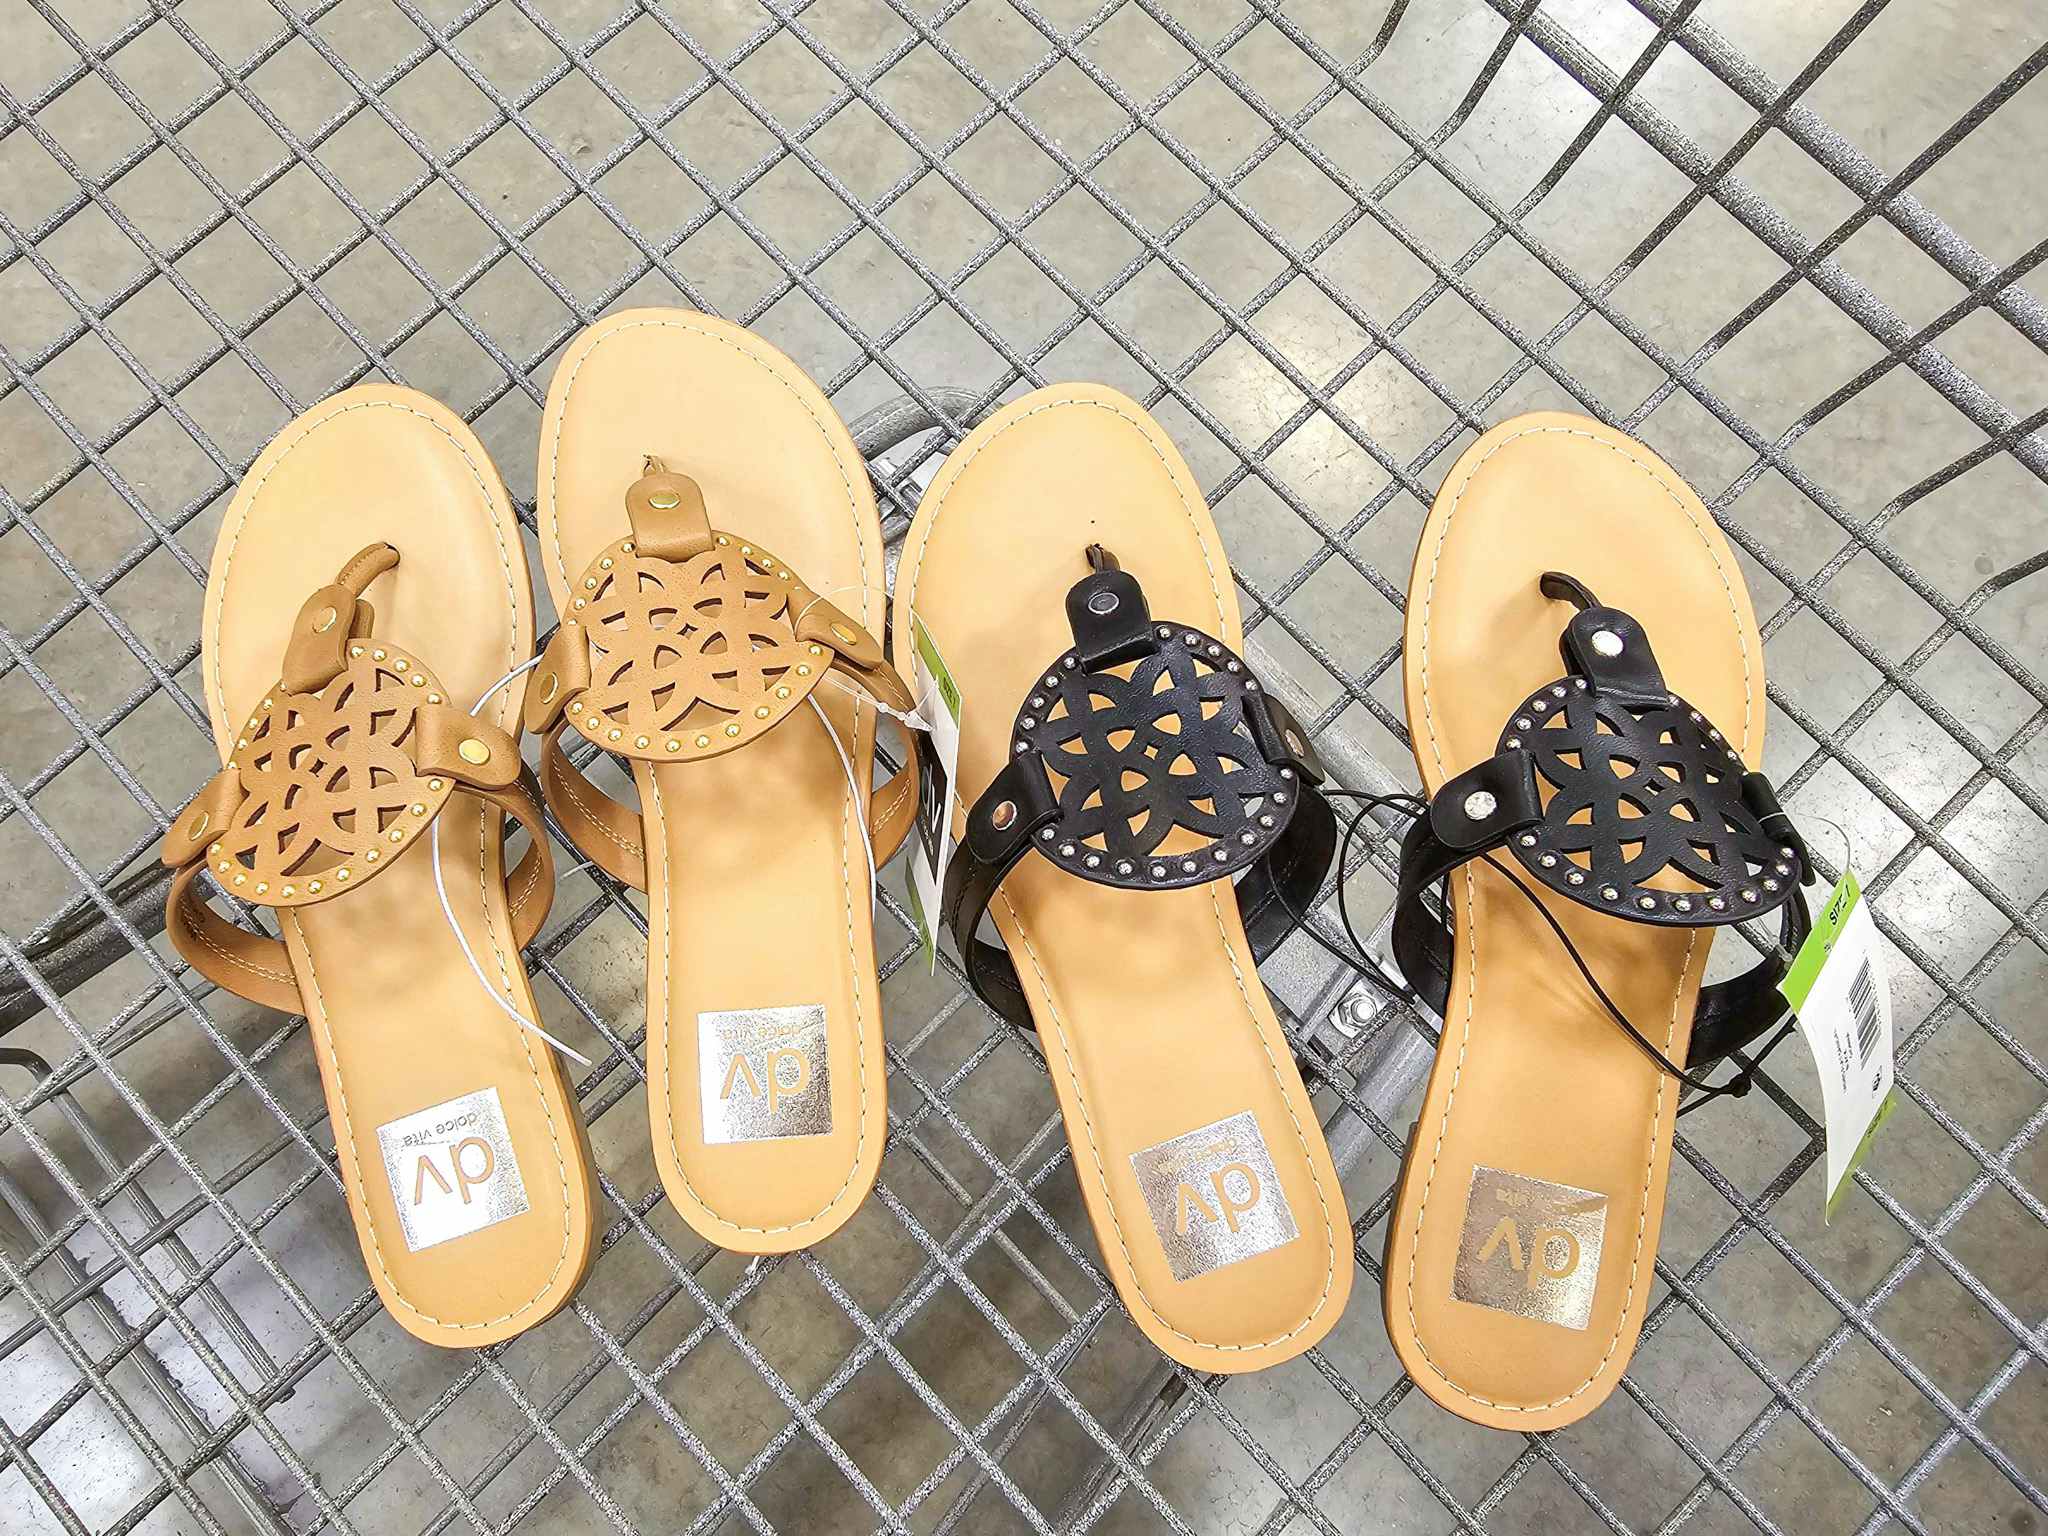 2 pairs of sandals in a cart